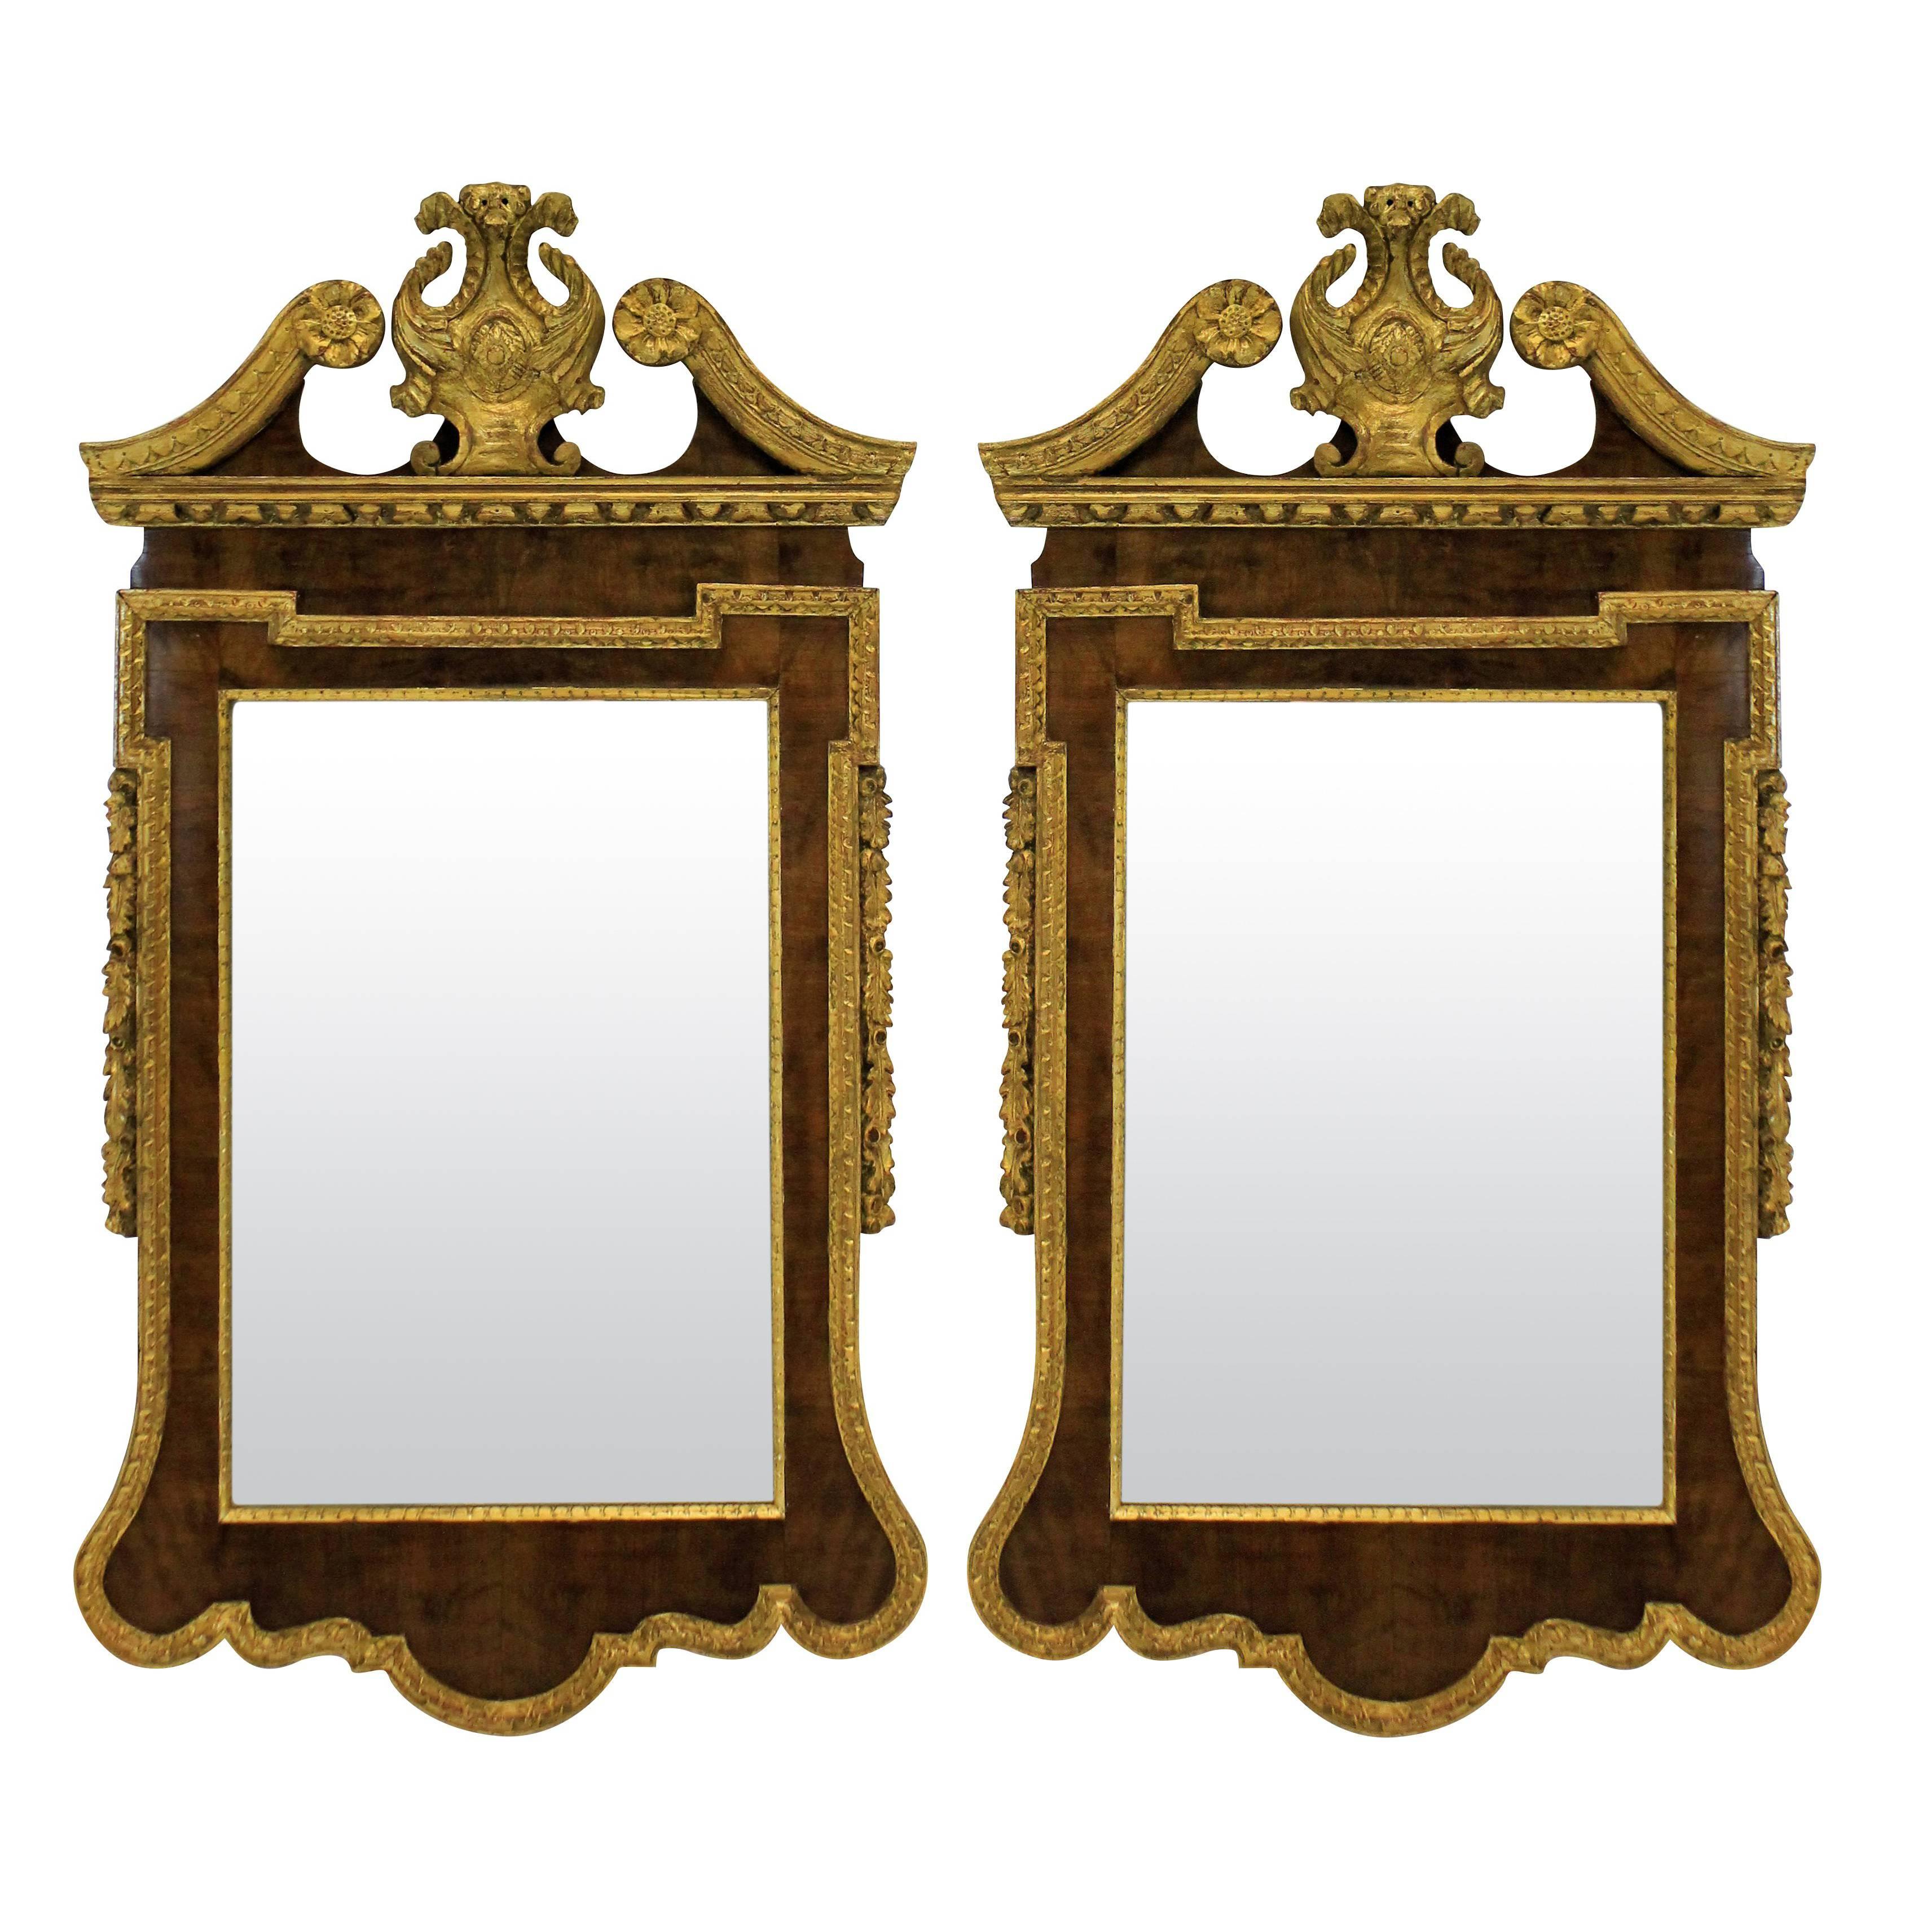 Pair of Large English George II Style Mirrors